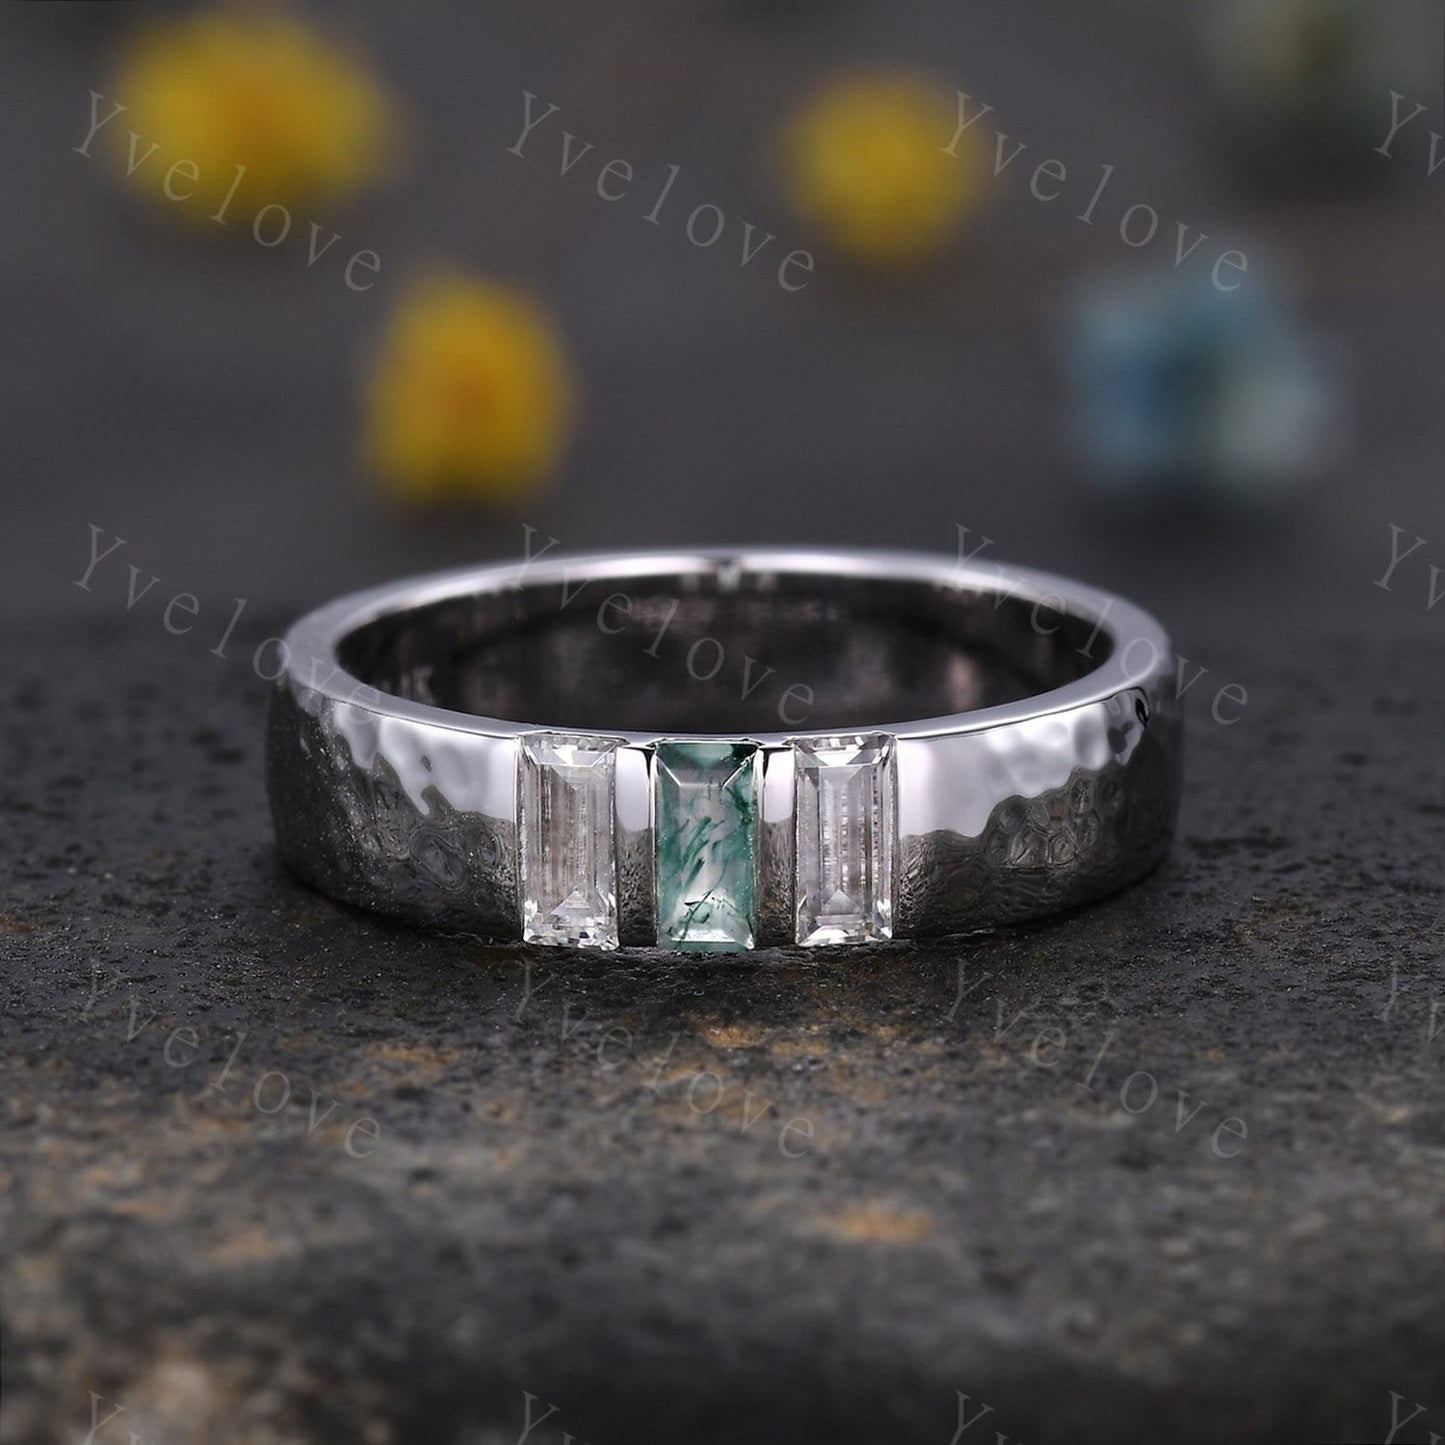 Retro Mens Baguette Moss agate Moissanite Wedding Band 5mm Hammered Band Silver Ring Mens Stackable Matching Band Anniversary Gift For Him